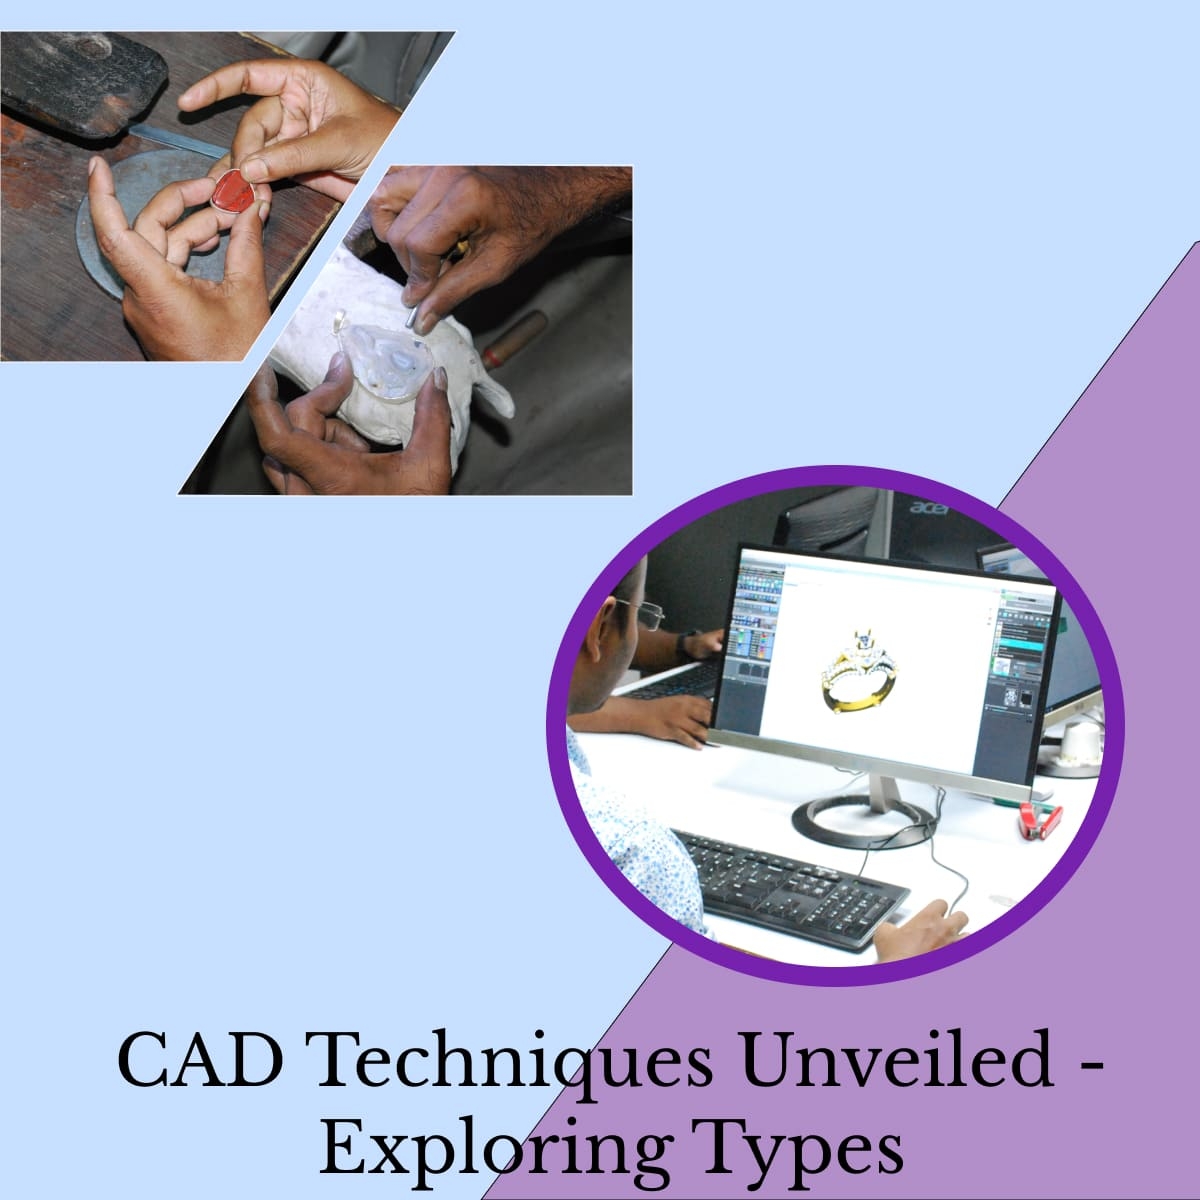 Types of CAD techniques